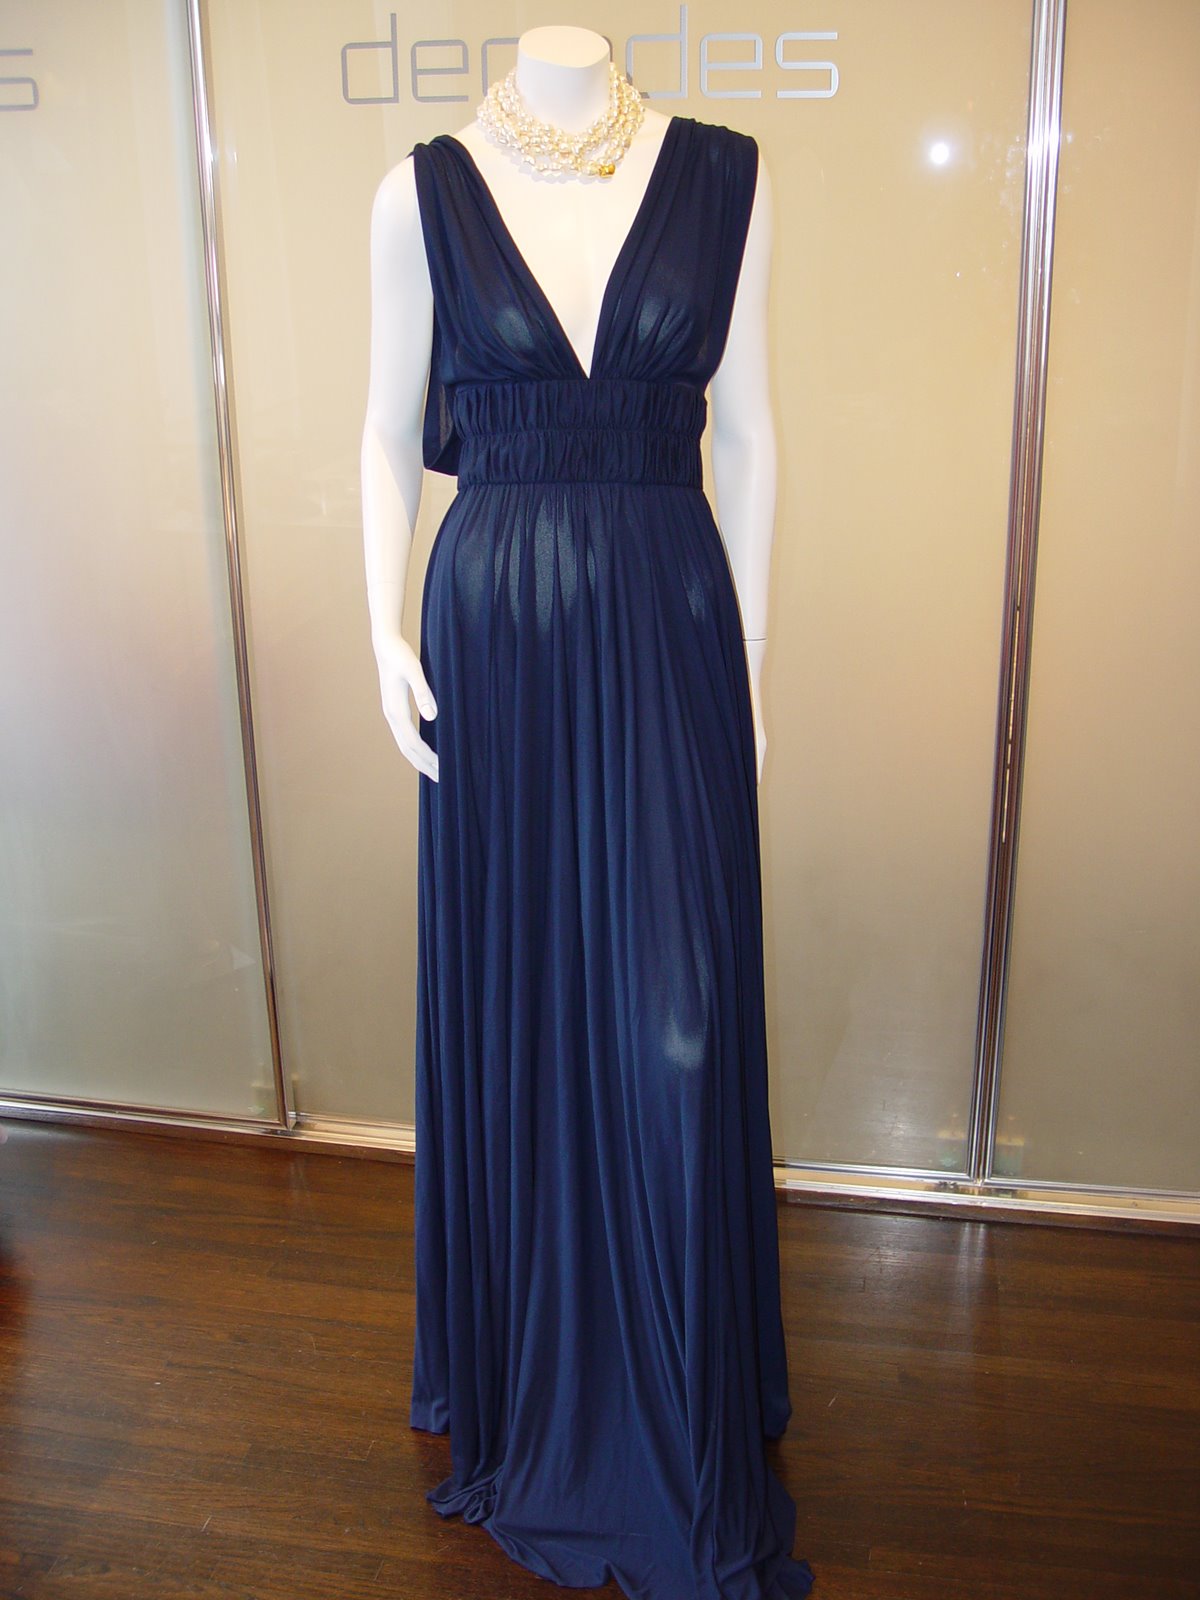 [YSL+RIVE+GAUCHE+MIDNIGHT+BLUE+JERSEY+DEEP+PLUNGE+GOWN+WITH+OPEN+BACK+NARROW+GATHERED+WAIST+C+70S+CONTEMPORARY+SIZE+FOUR+WITH+SMALL+WAIST.JPG.JPG]